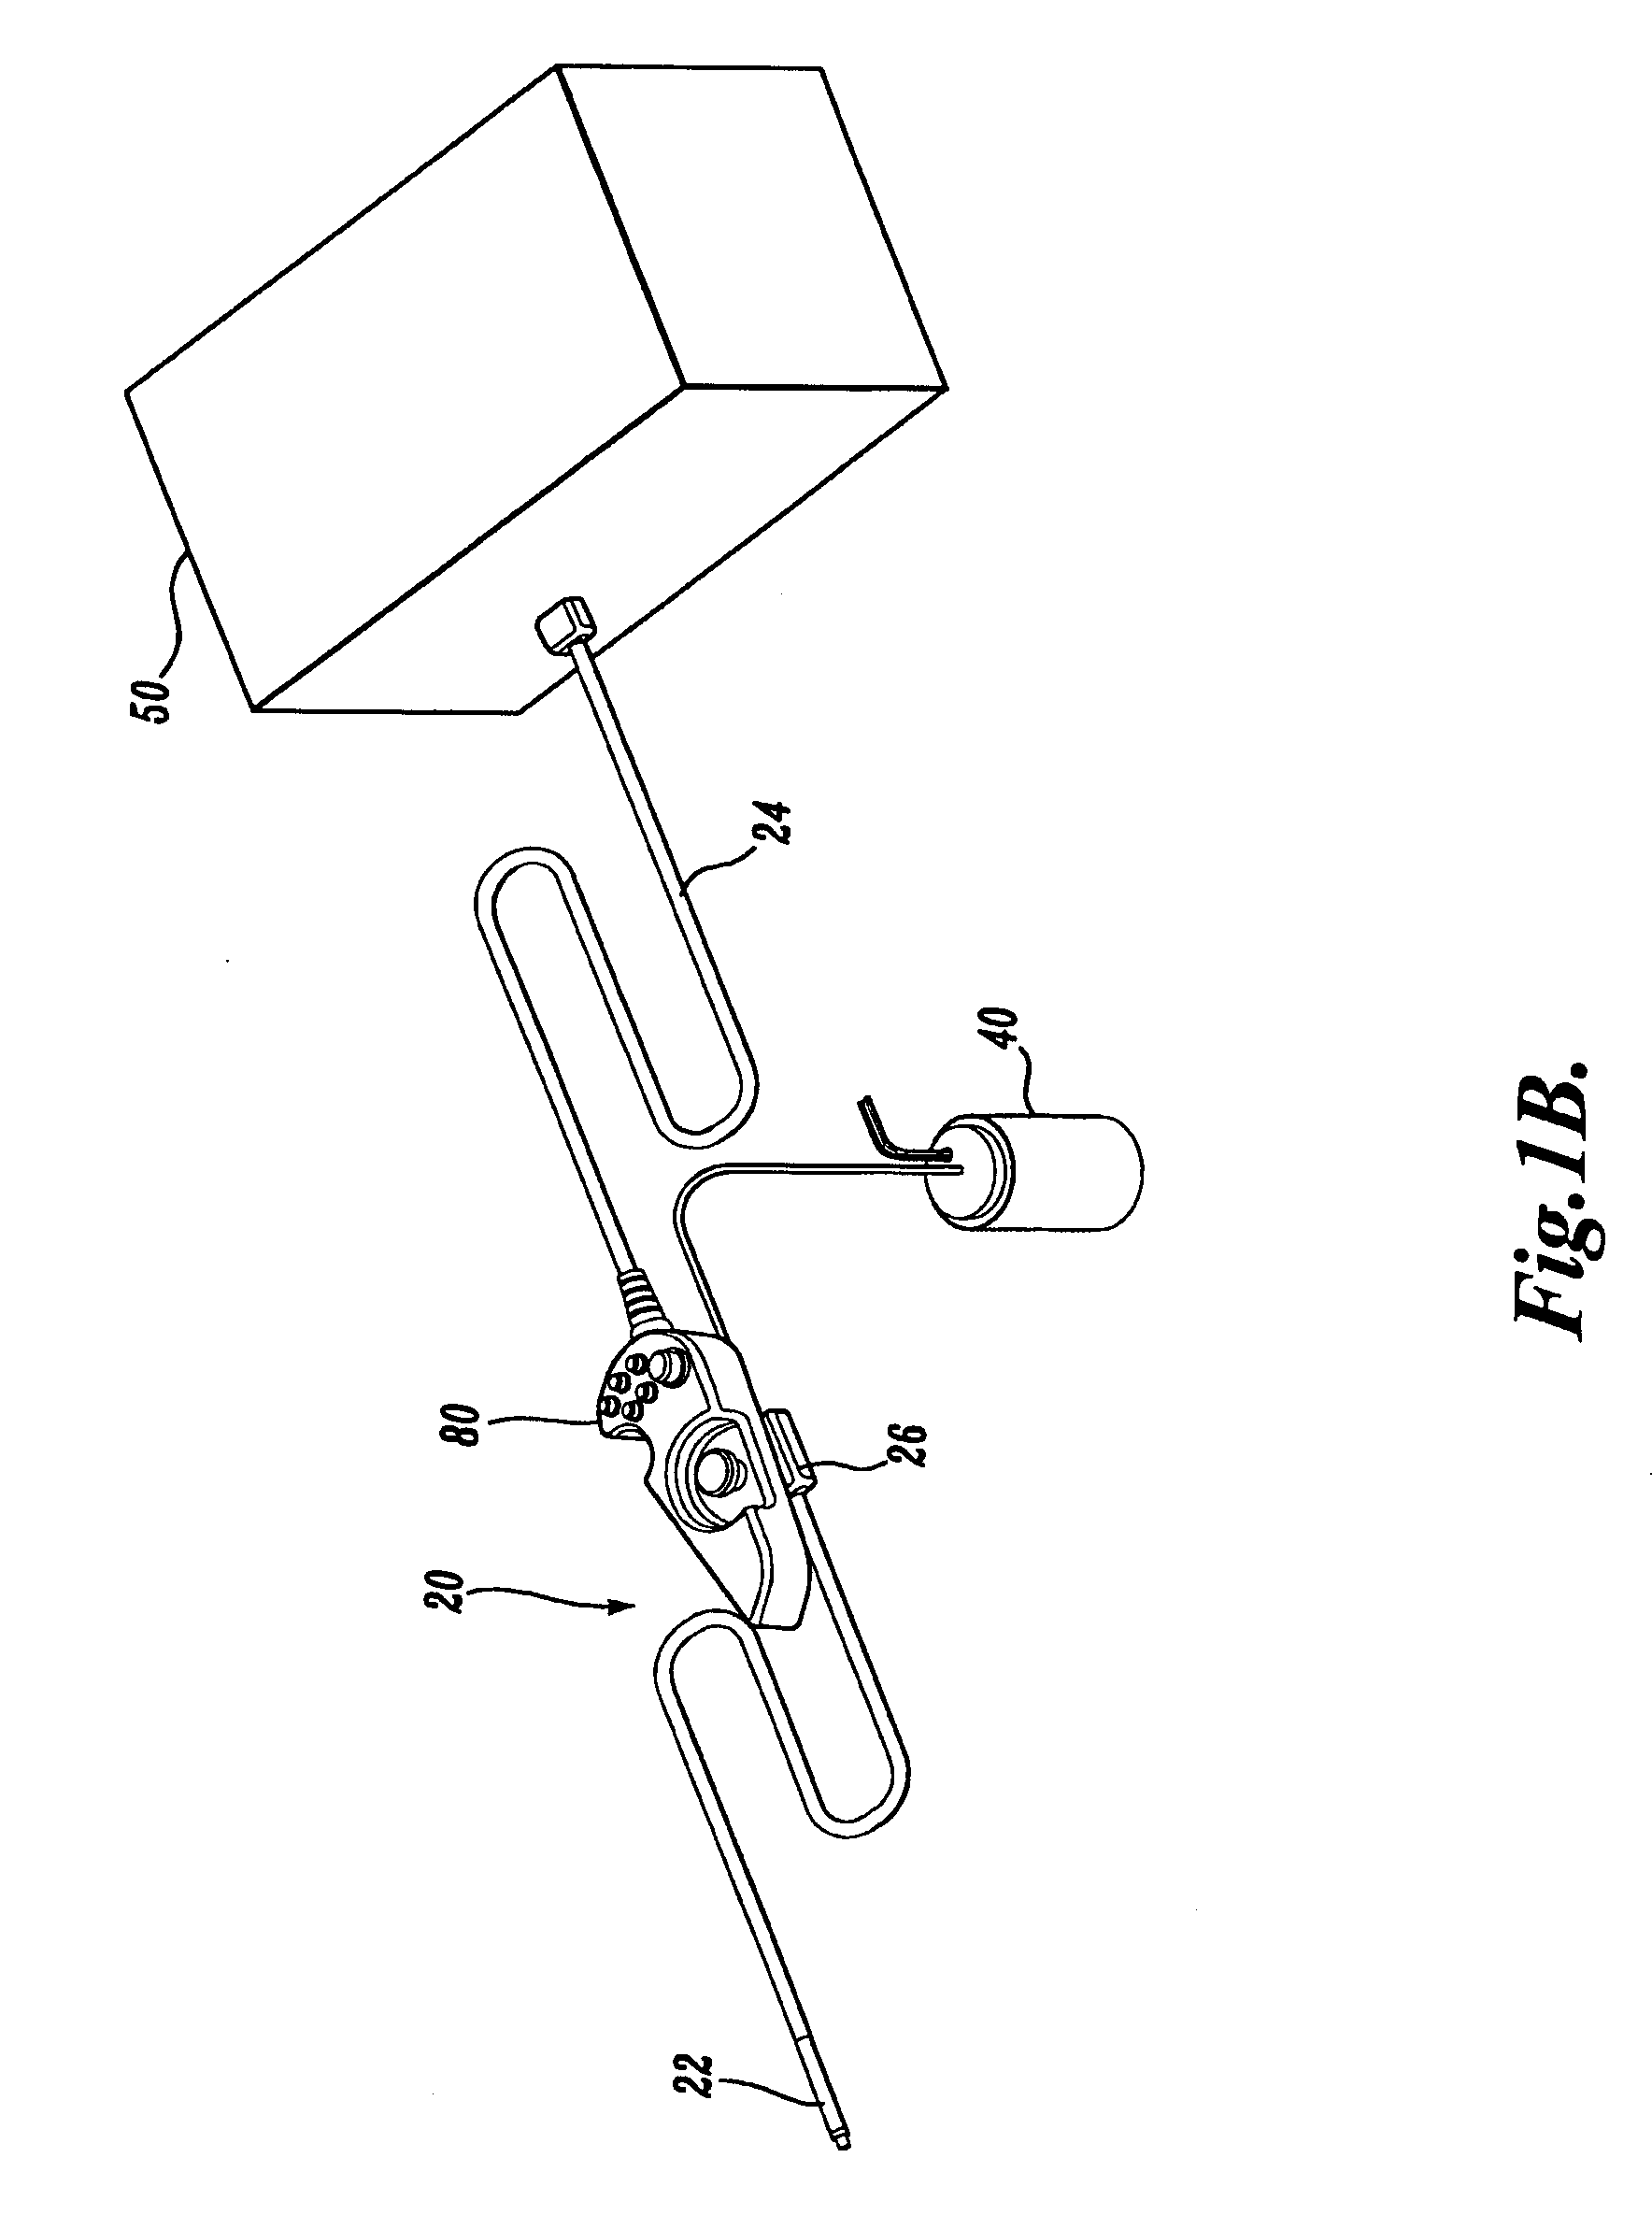 Fluid manifold for endoscope system